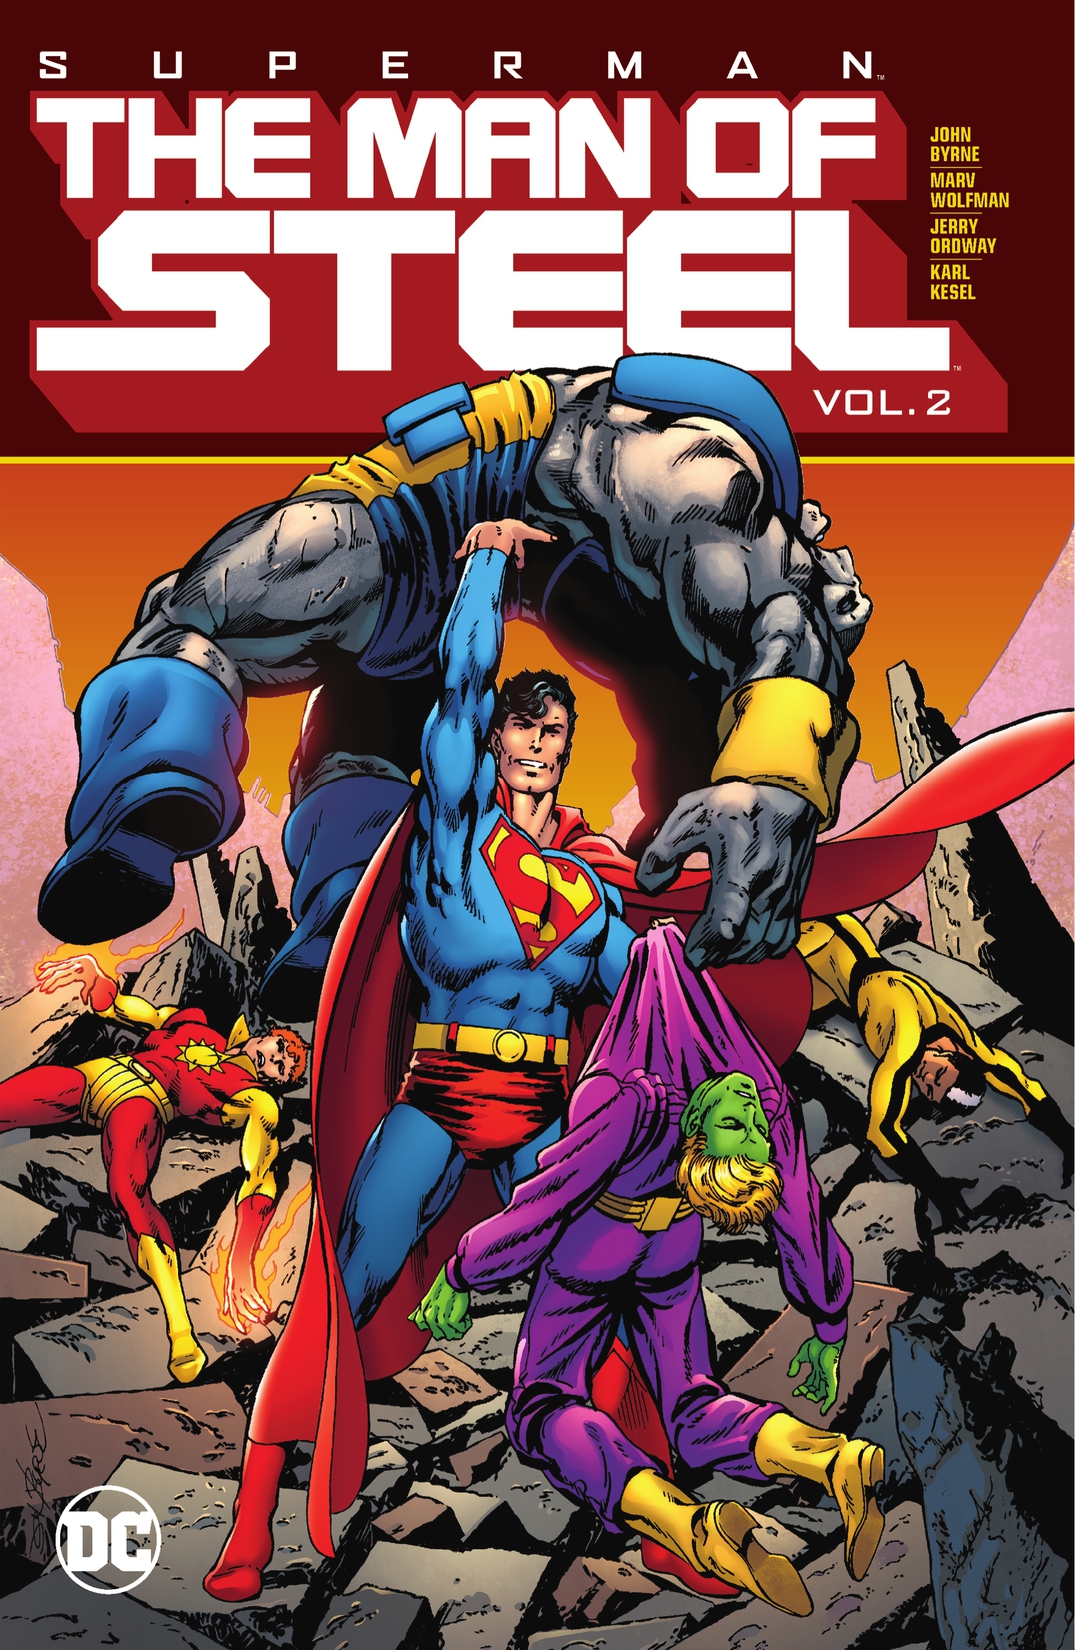 Superman: The Man of Steel Vol. 2 preview images